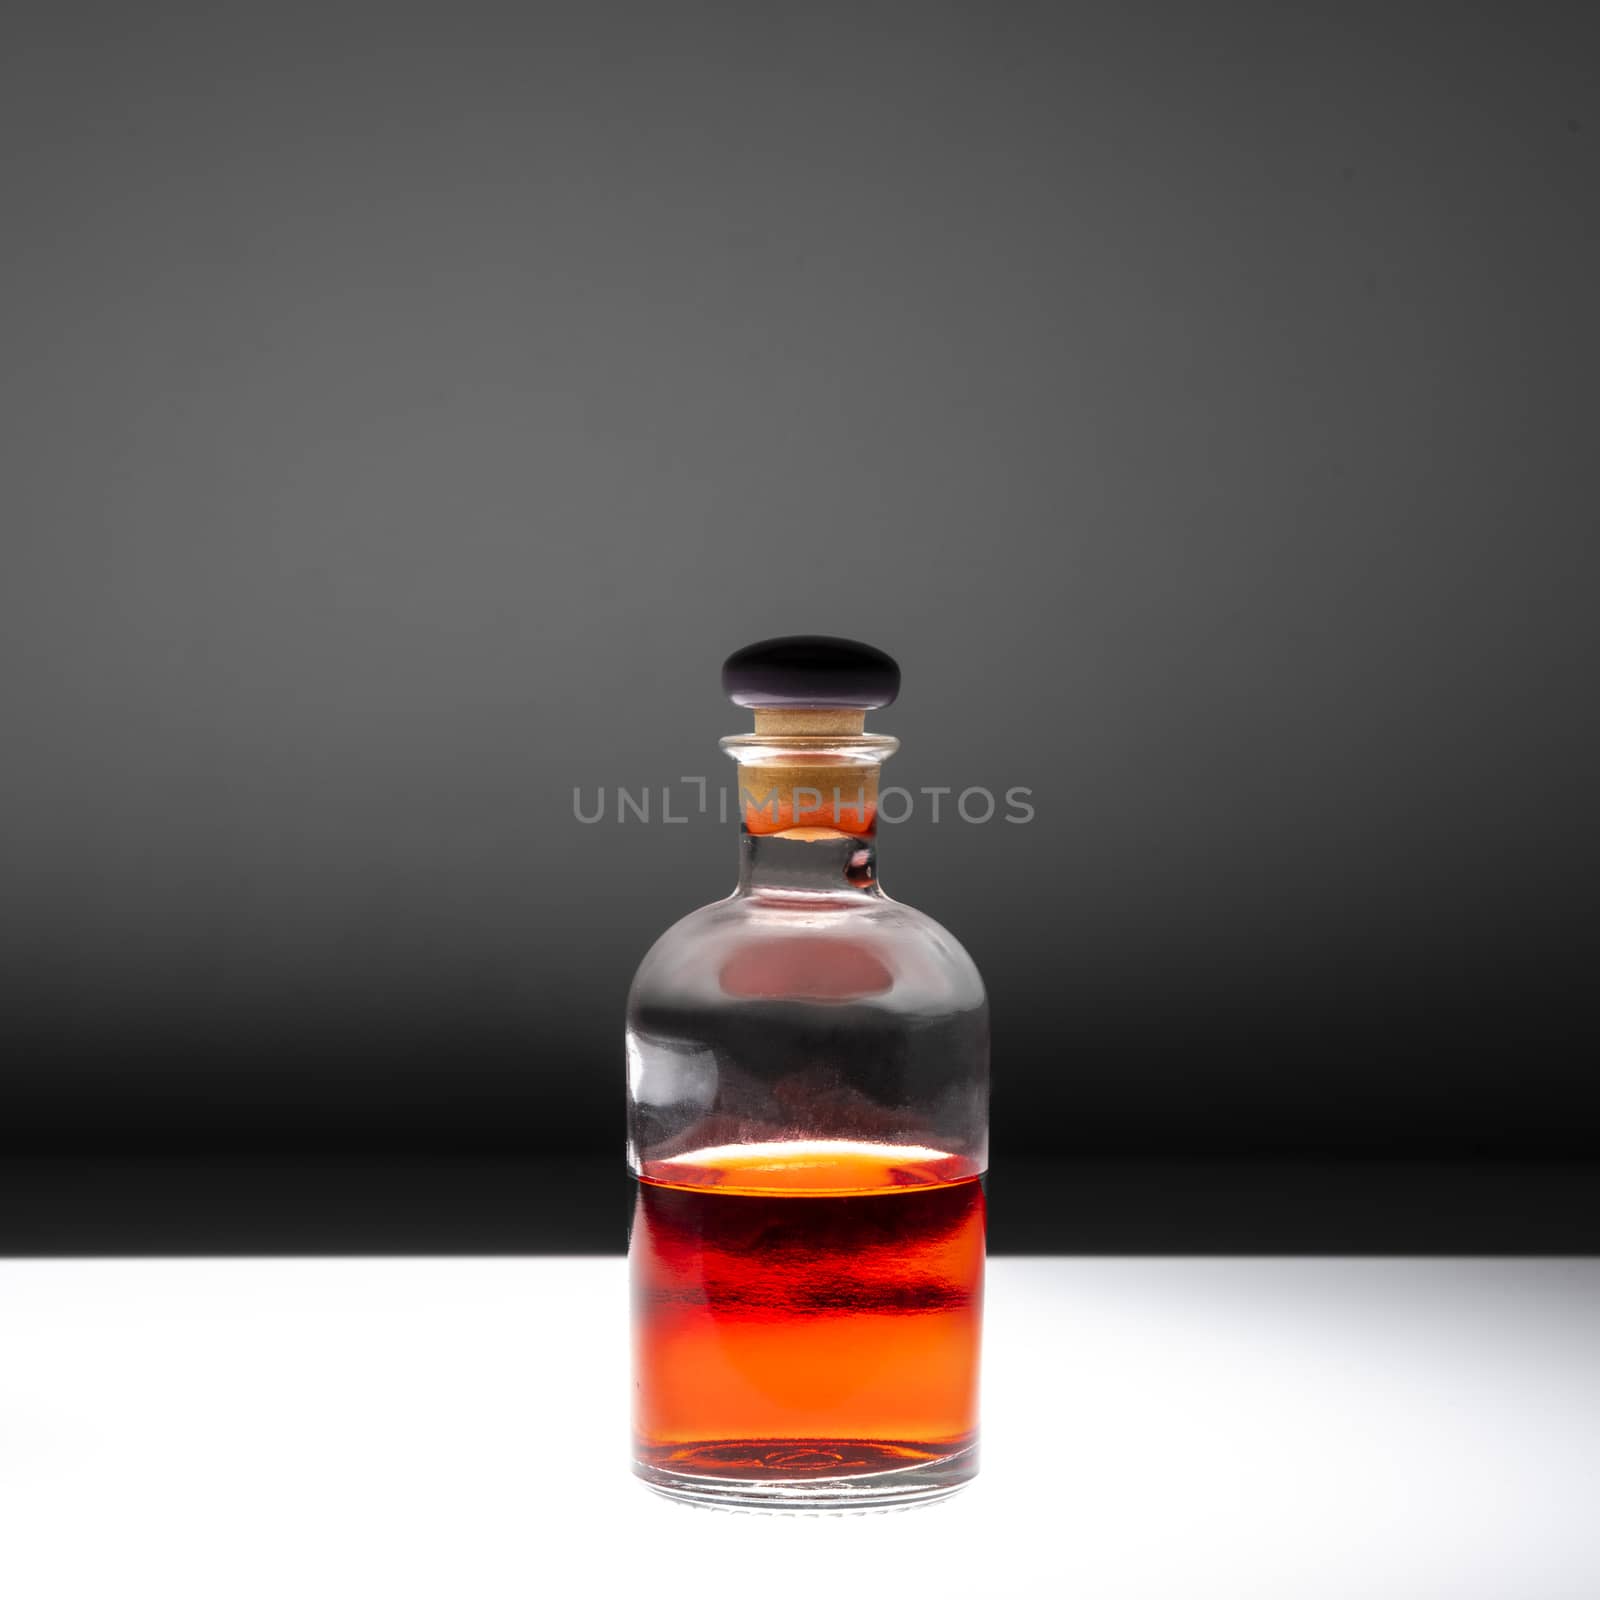 Bottle with red liquid by sergiodv